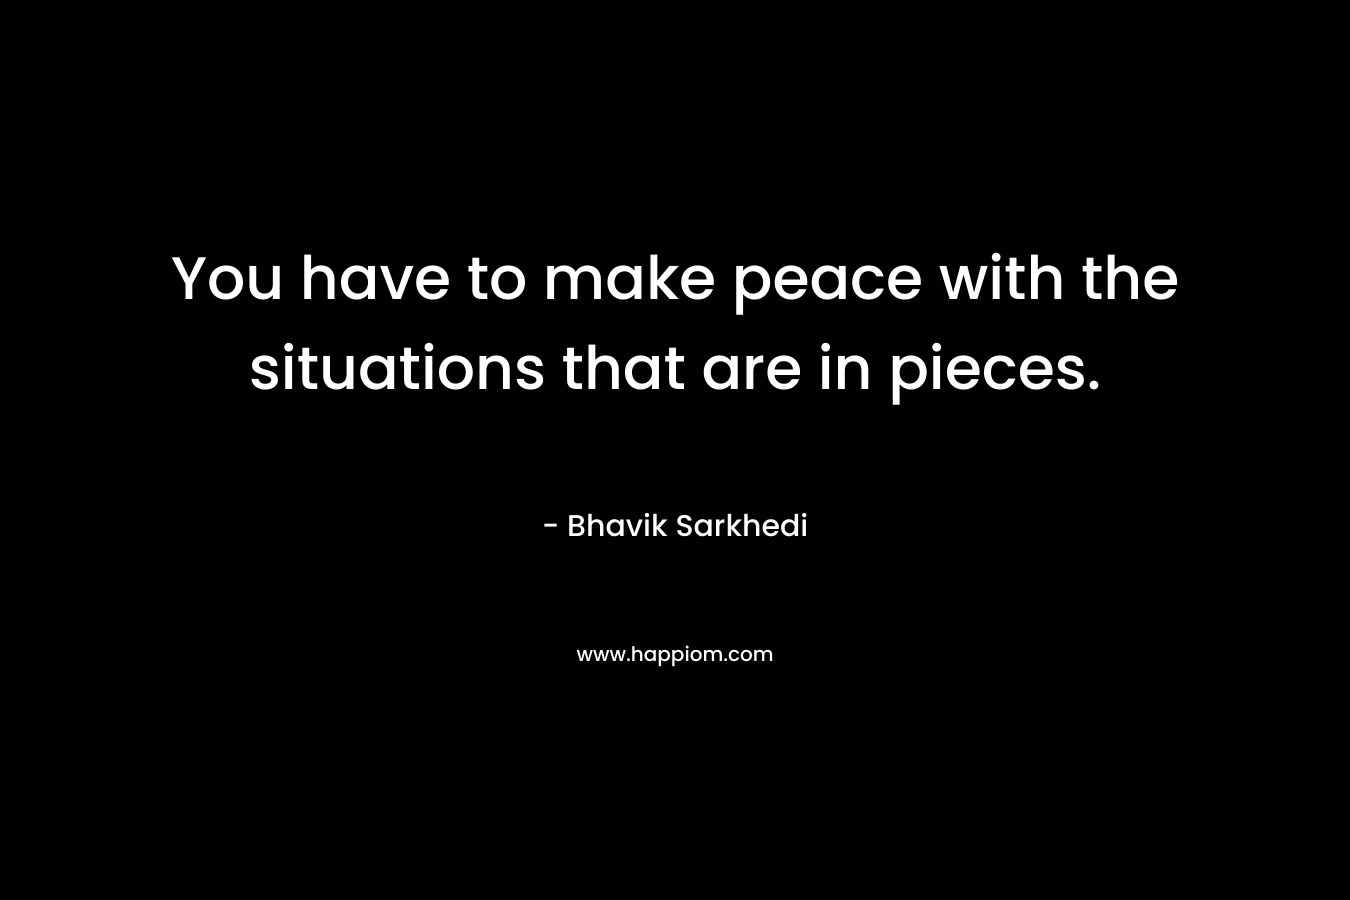 You have to make peace with the situations that are in pieces.